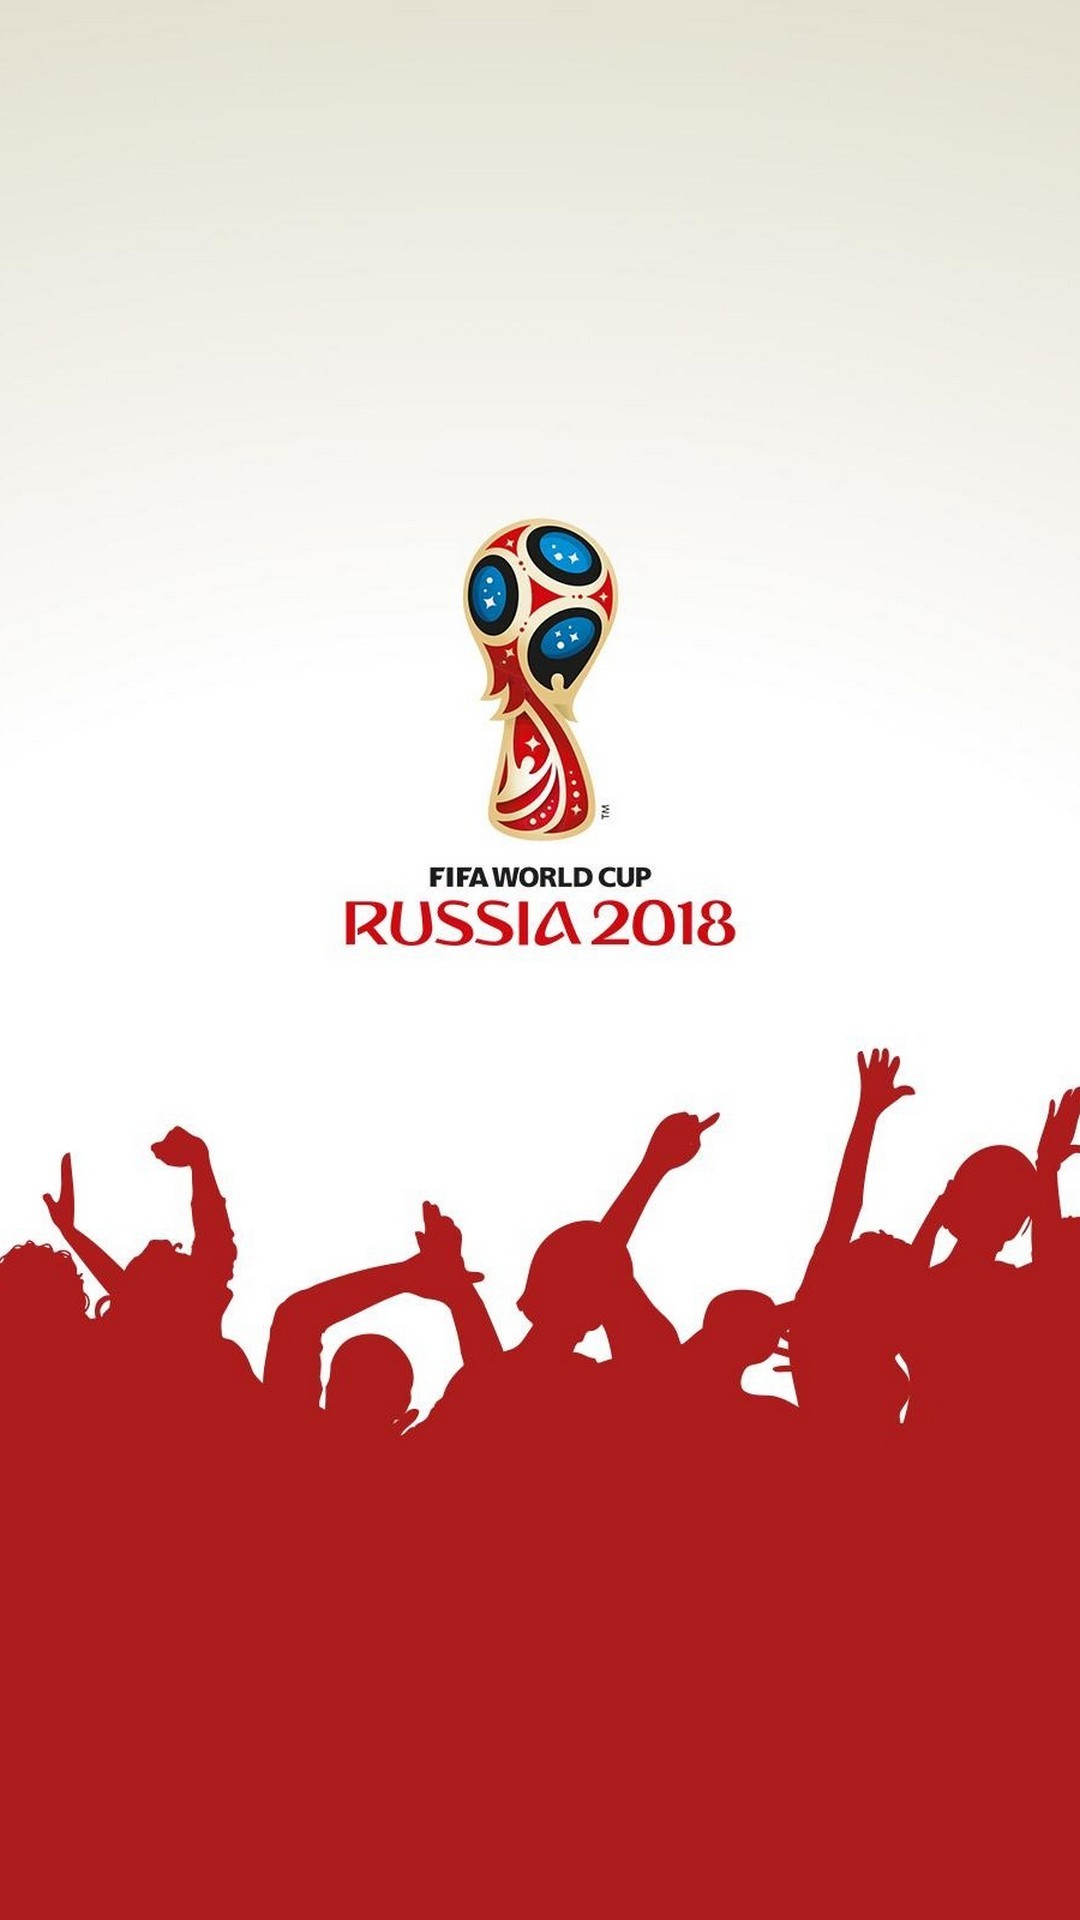 Wallpaper FIFA World Cup iPhone resolution 1080x1920